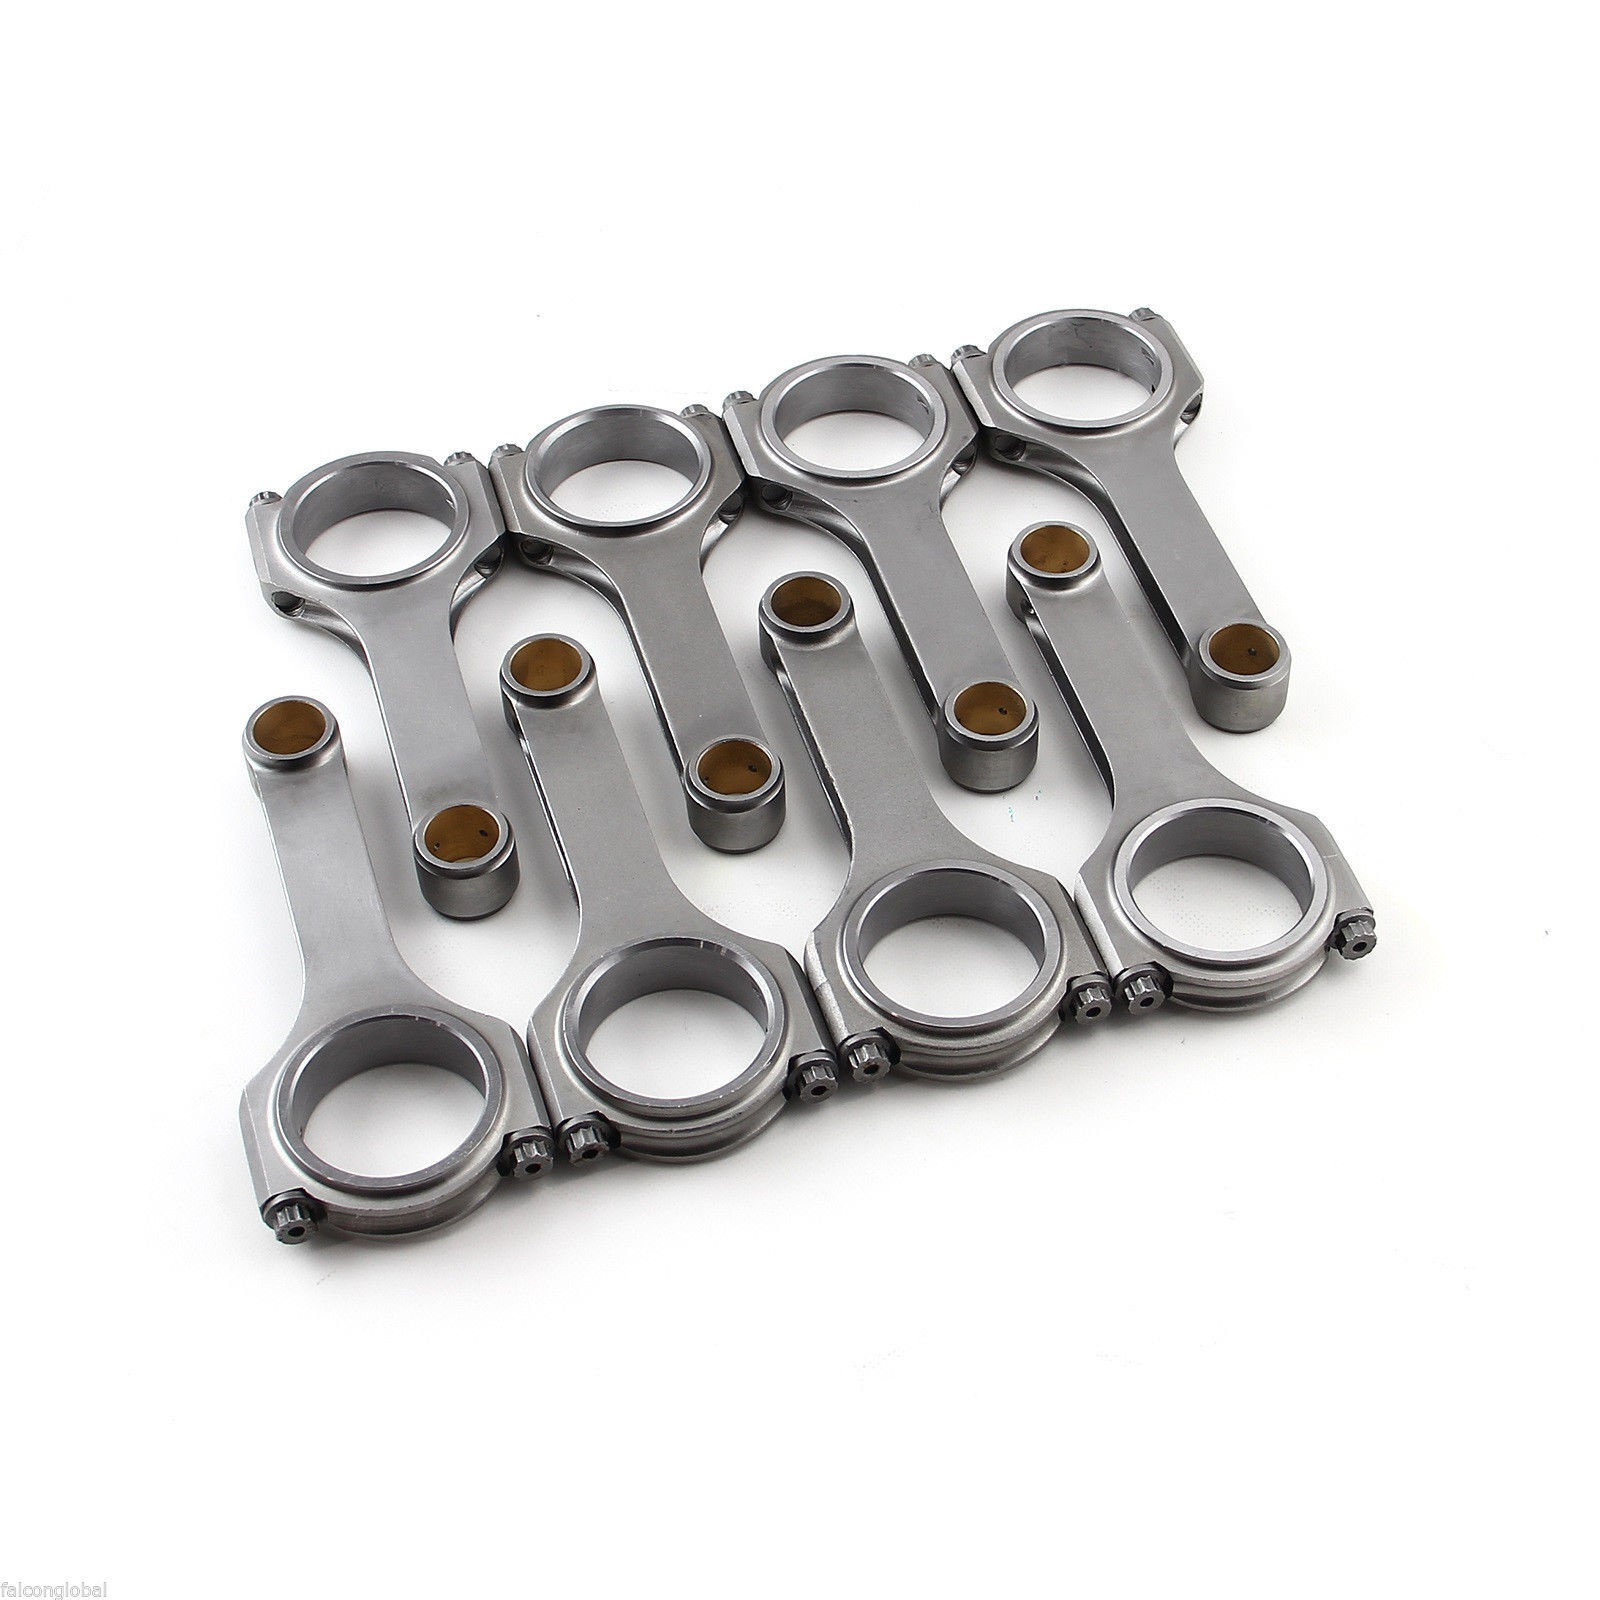 H-BEAM 850HP Falcon Connecting Rods 6.750